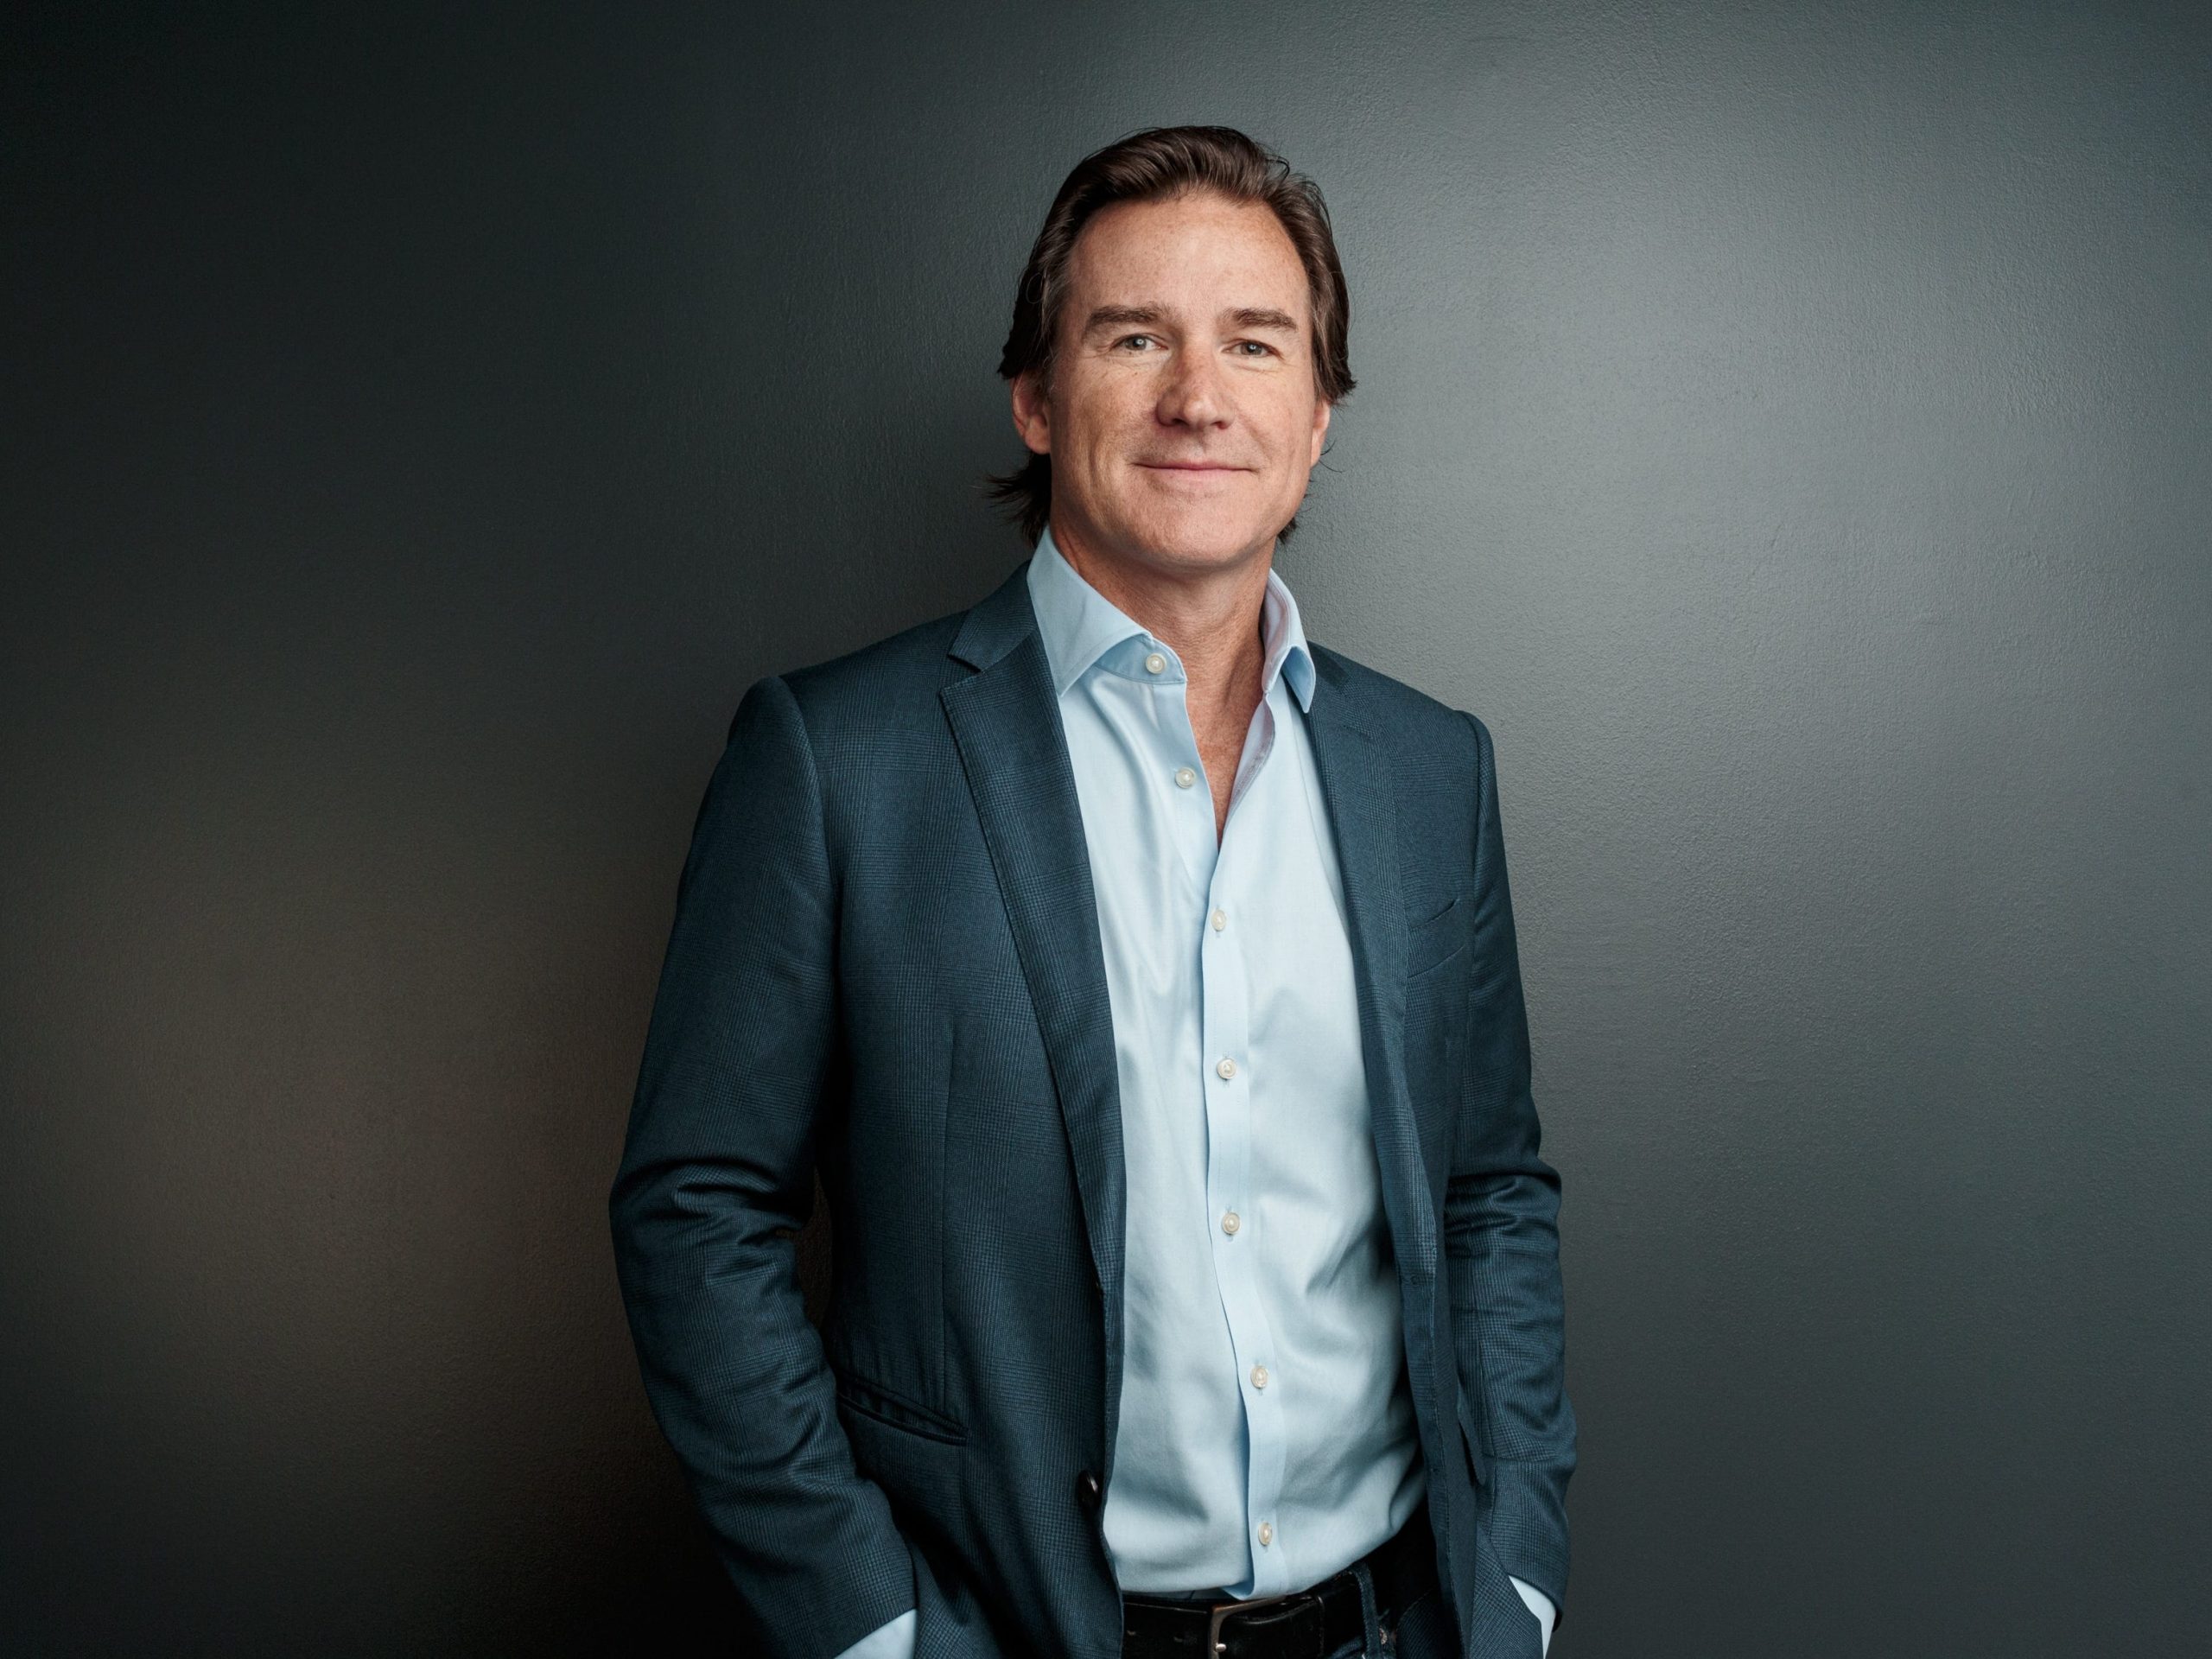 Bryan Murphy, CEO of flexible workspace provider Breather